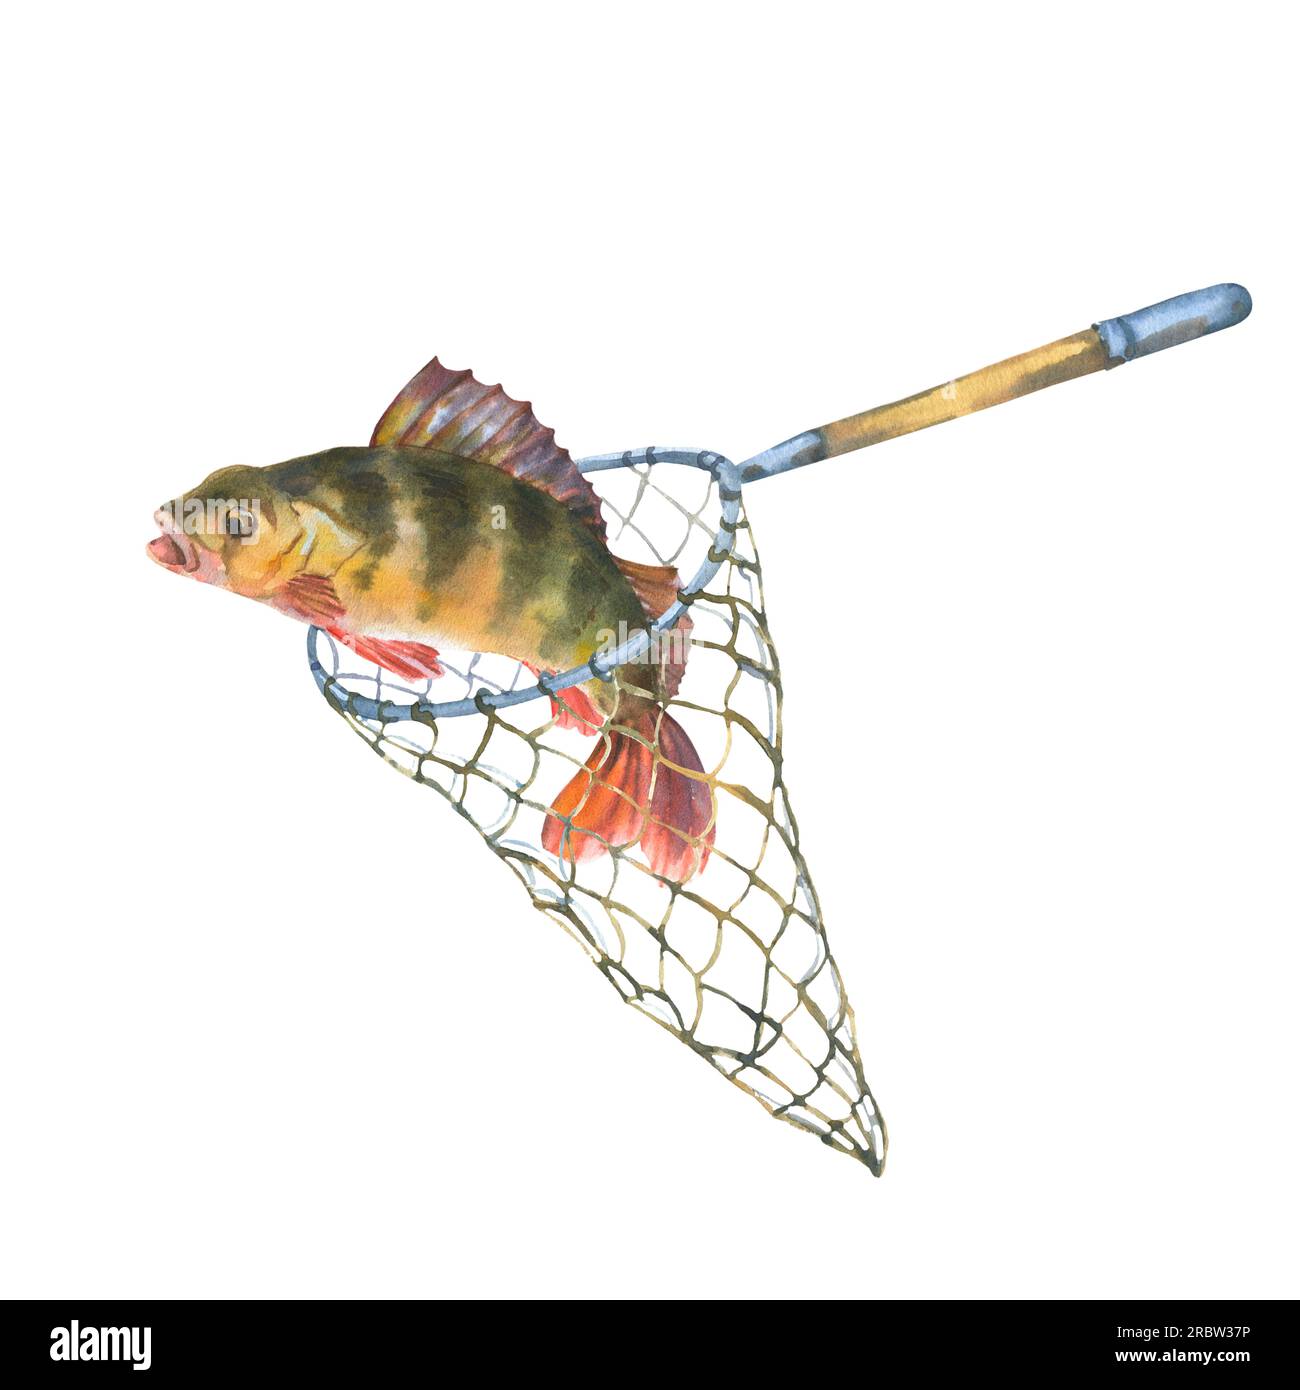 Watercolor illustration, fish caught in a fishing net. Perch